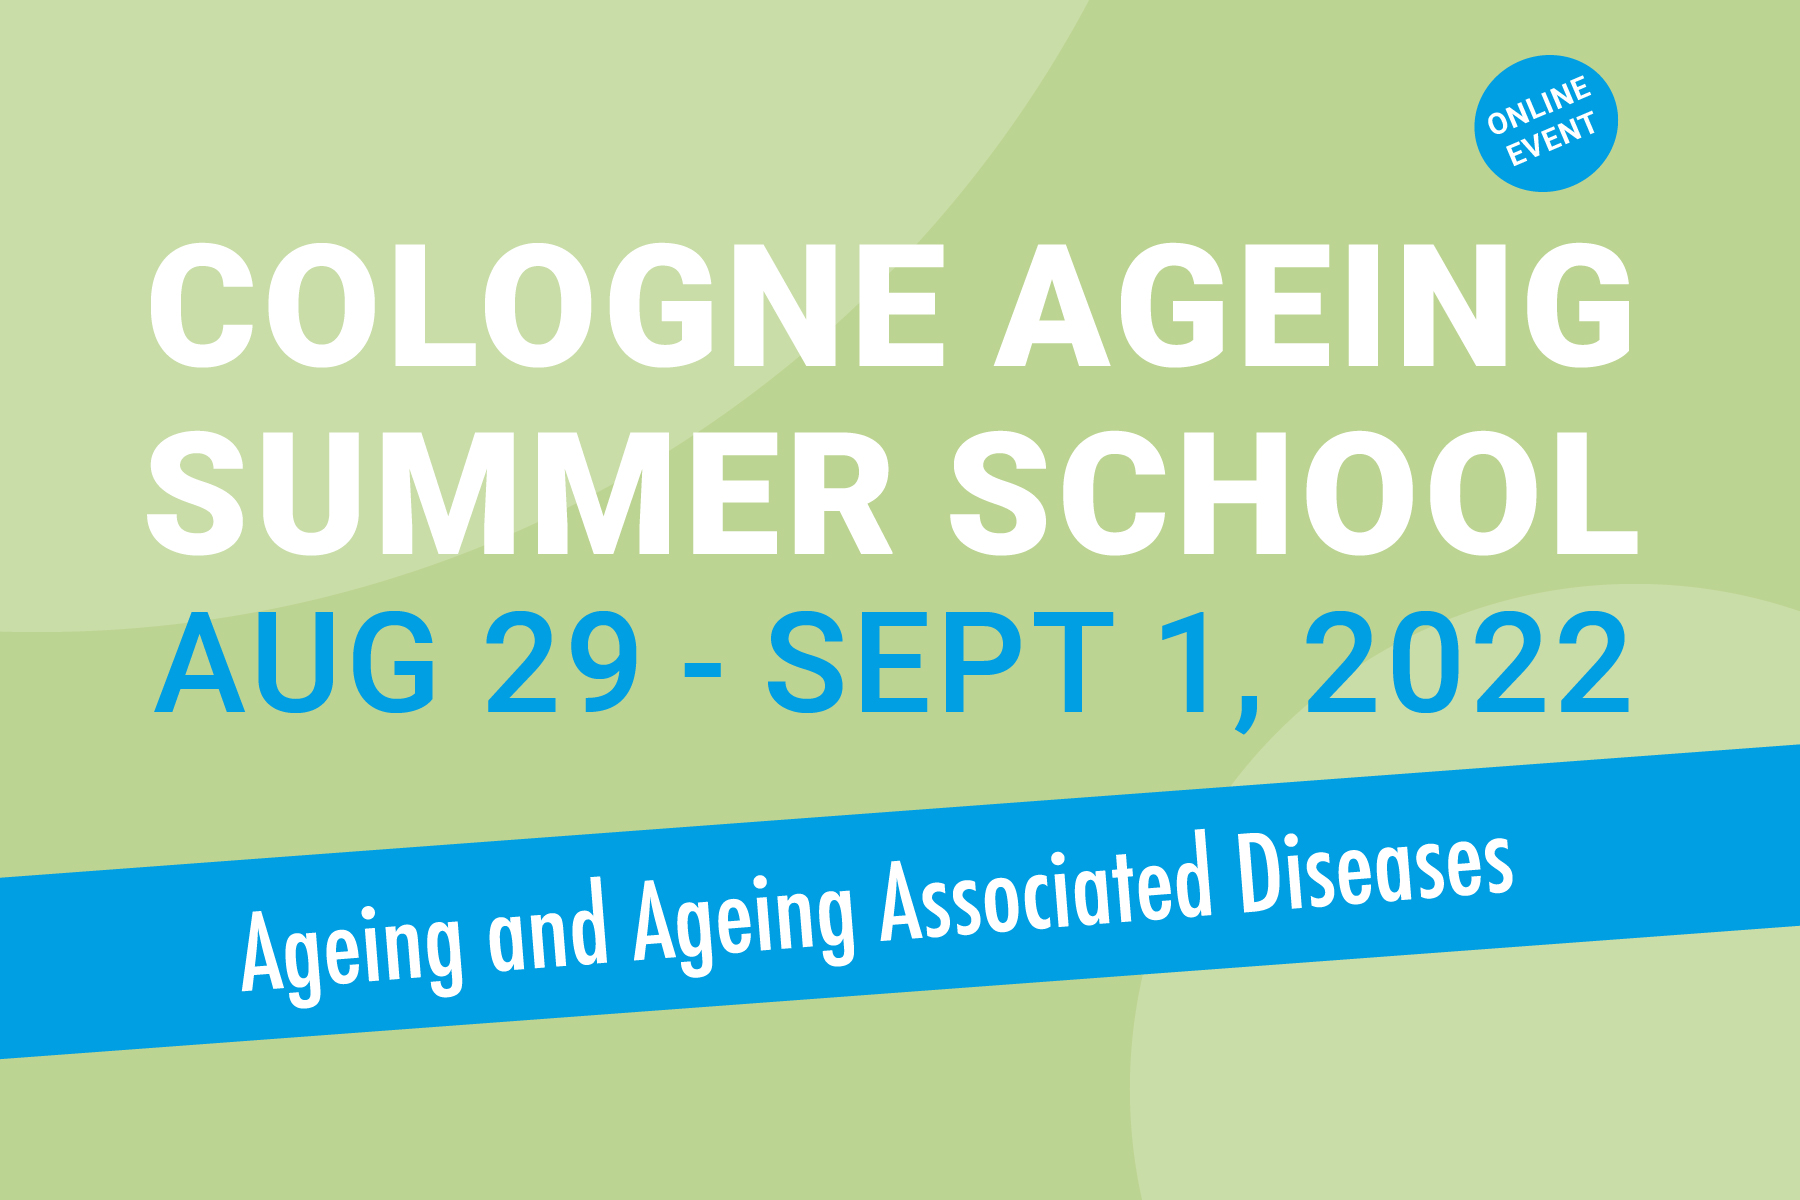 Cologne Ageing Summer School 2022 